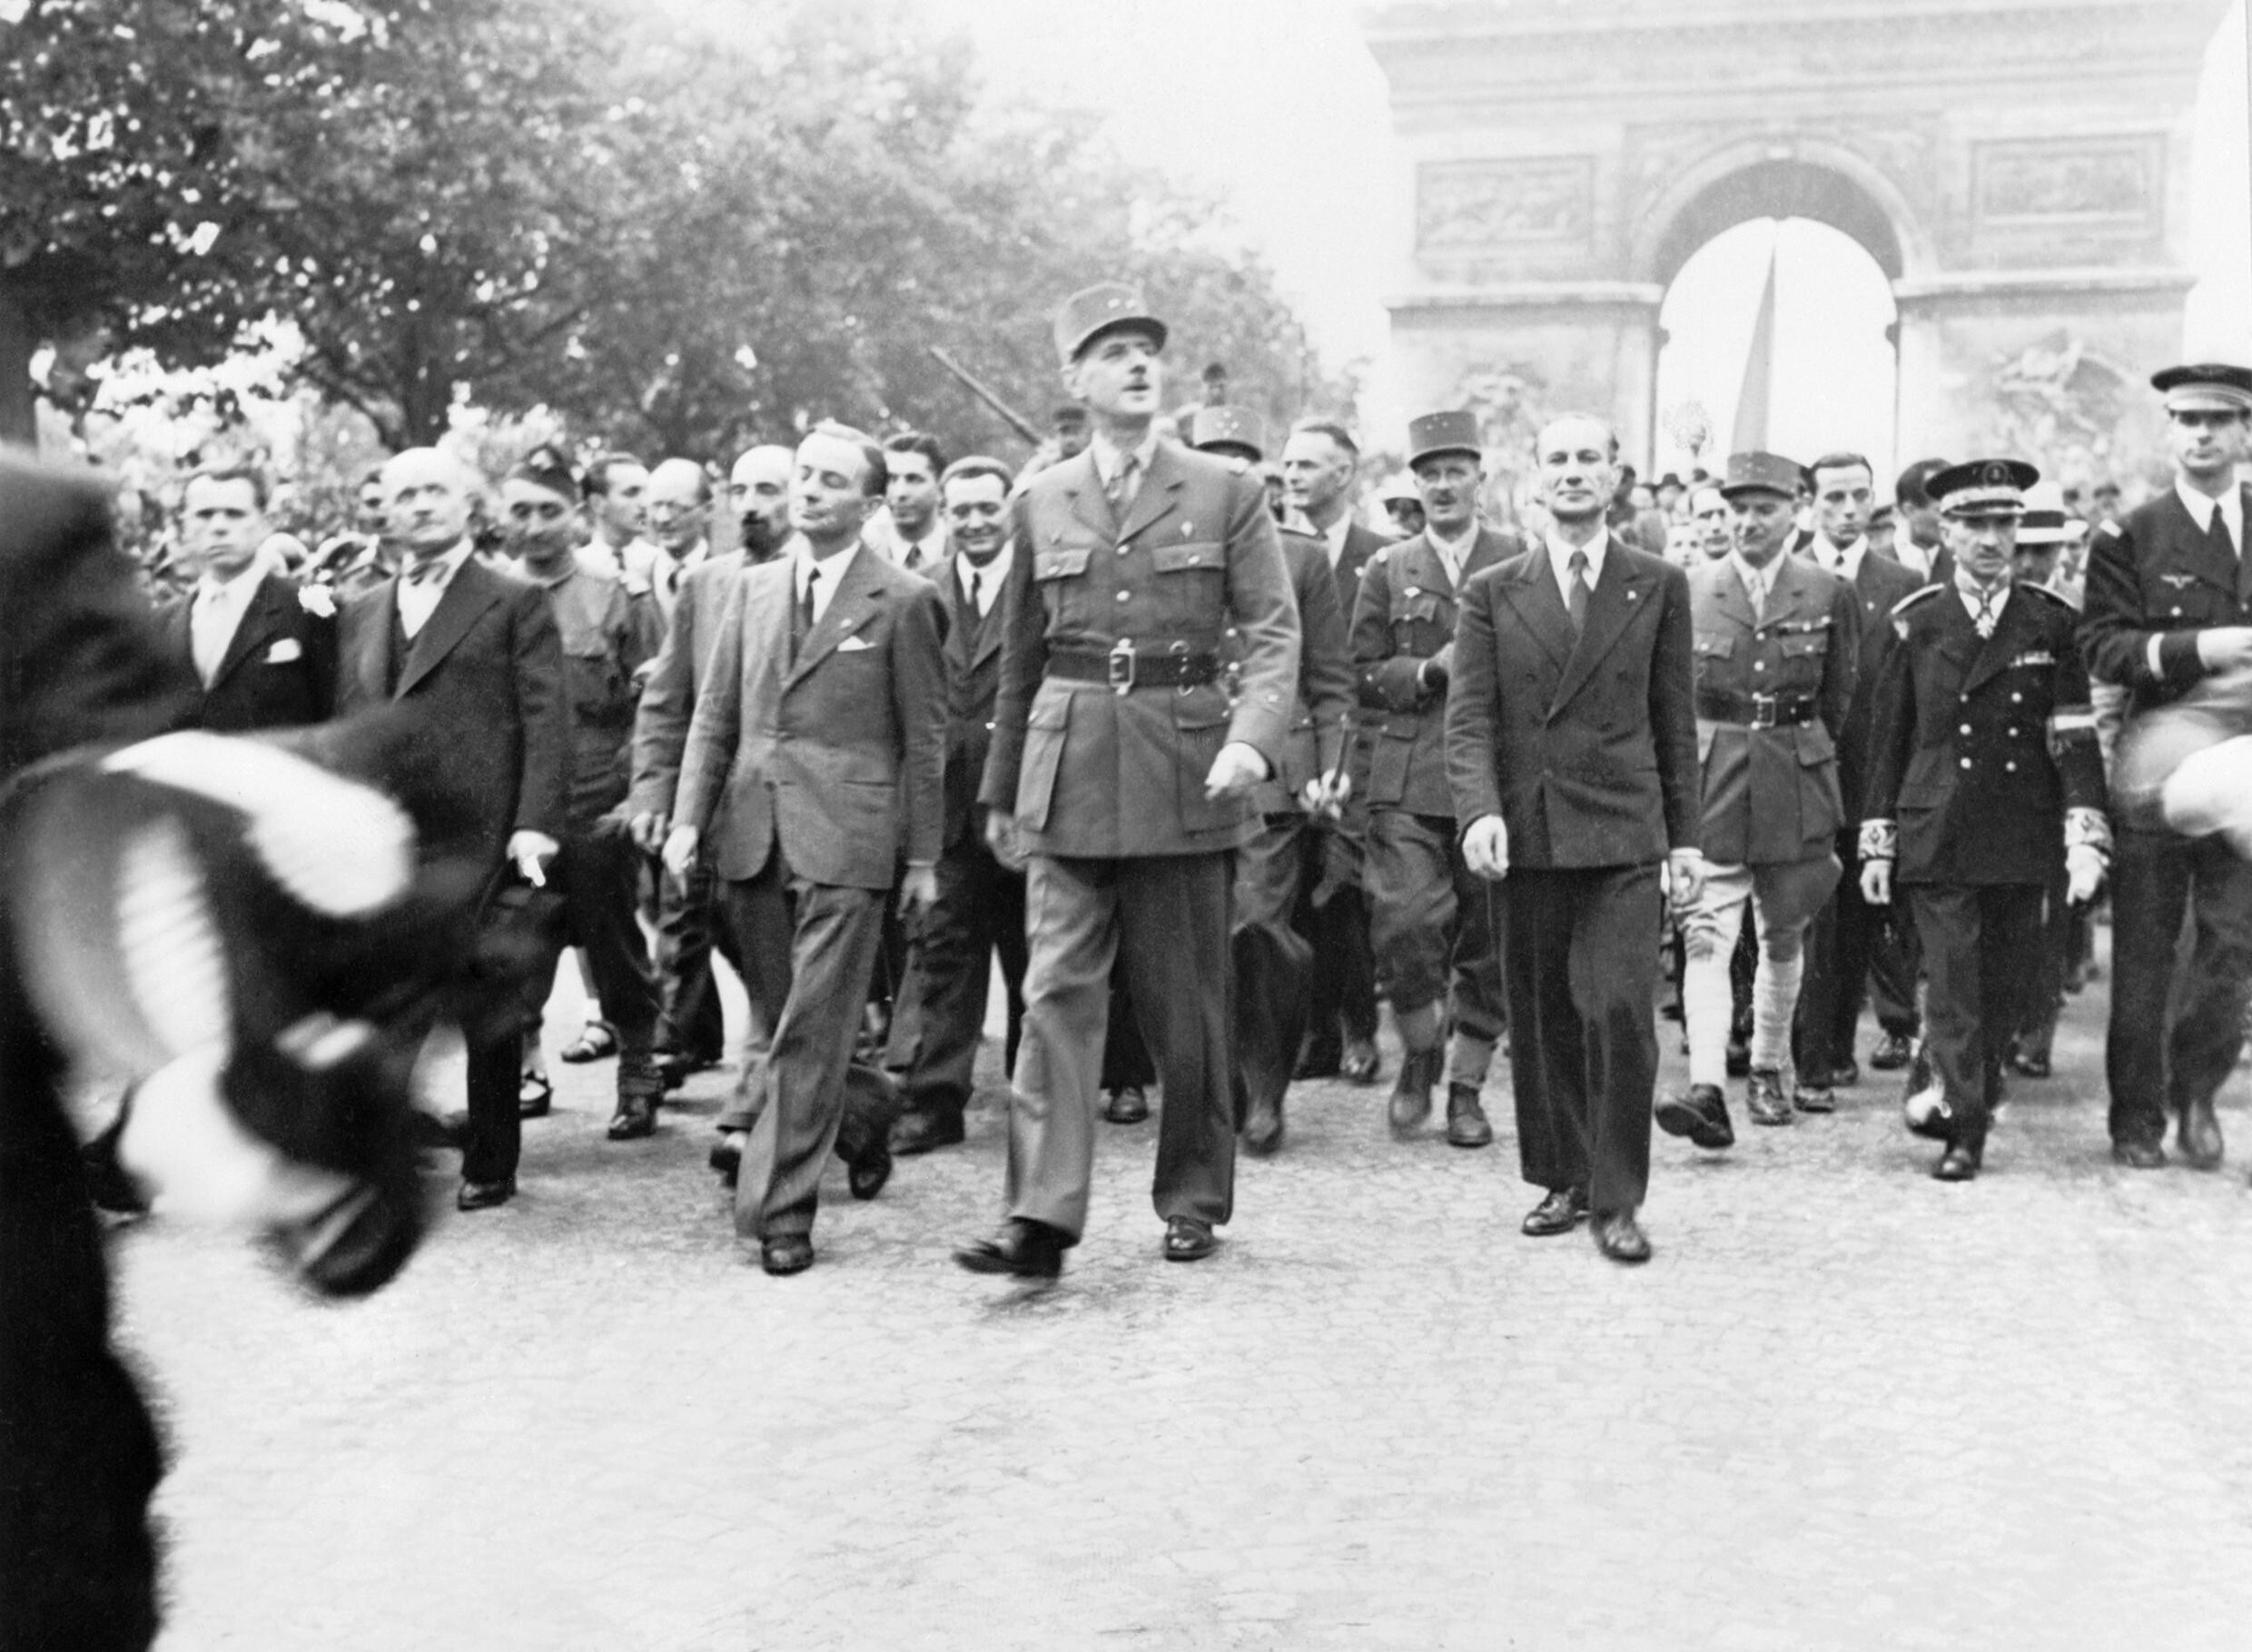 The Liberation of Paris, 25 - 26 August 1944. General Charles de Gaulle and his entourage set off from the Arc de Triomphe down the Champs Elysees to Notre Dame for a service of thanksgiving following the city’s liberation in August 1944. London: Imperial War Museum. Public domain.